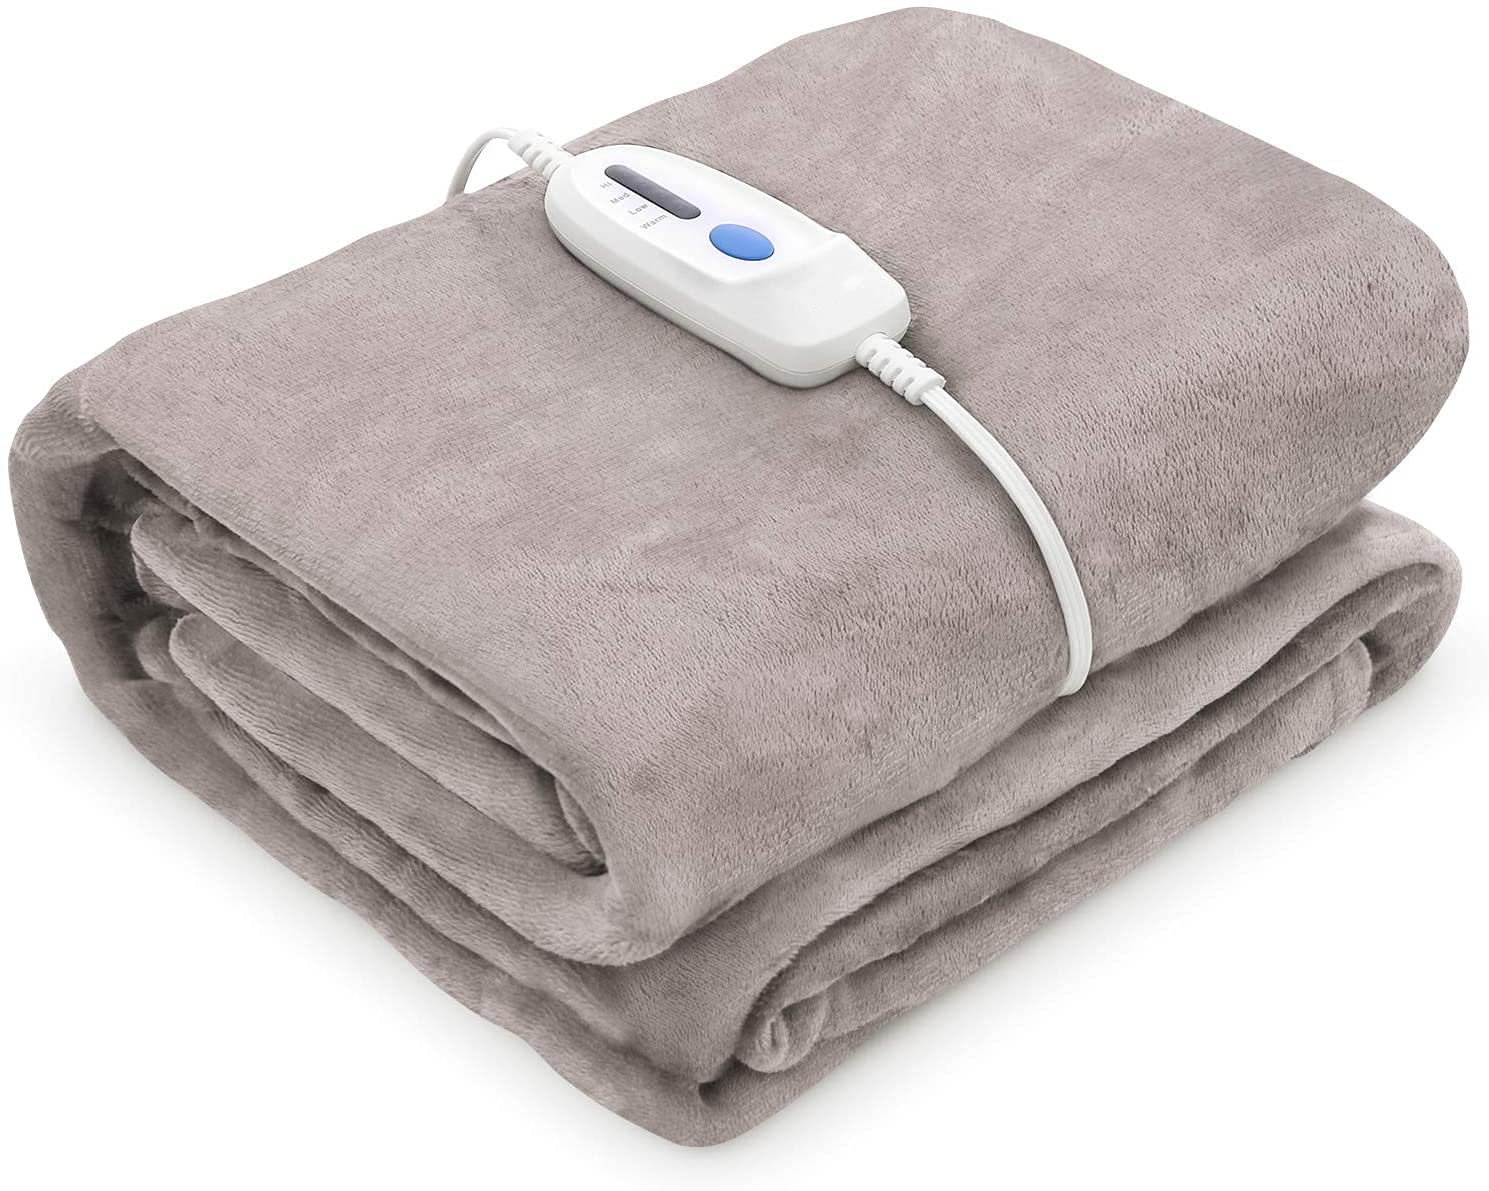 MARNUR Electric Blanket Full Size 72x84 Heated Blanket Flannel & Shu  Velveteen with 4 Heating Levels, 10H Auto-off, Machine Washable 